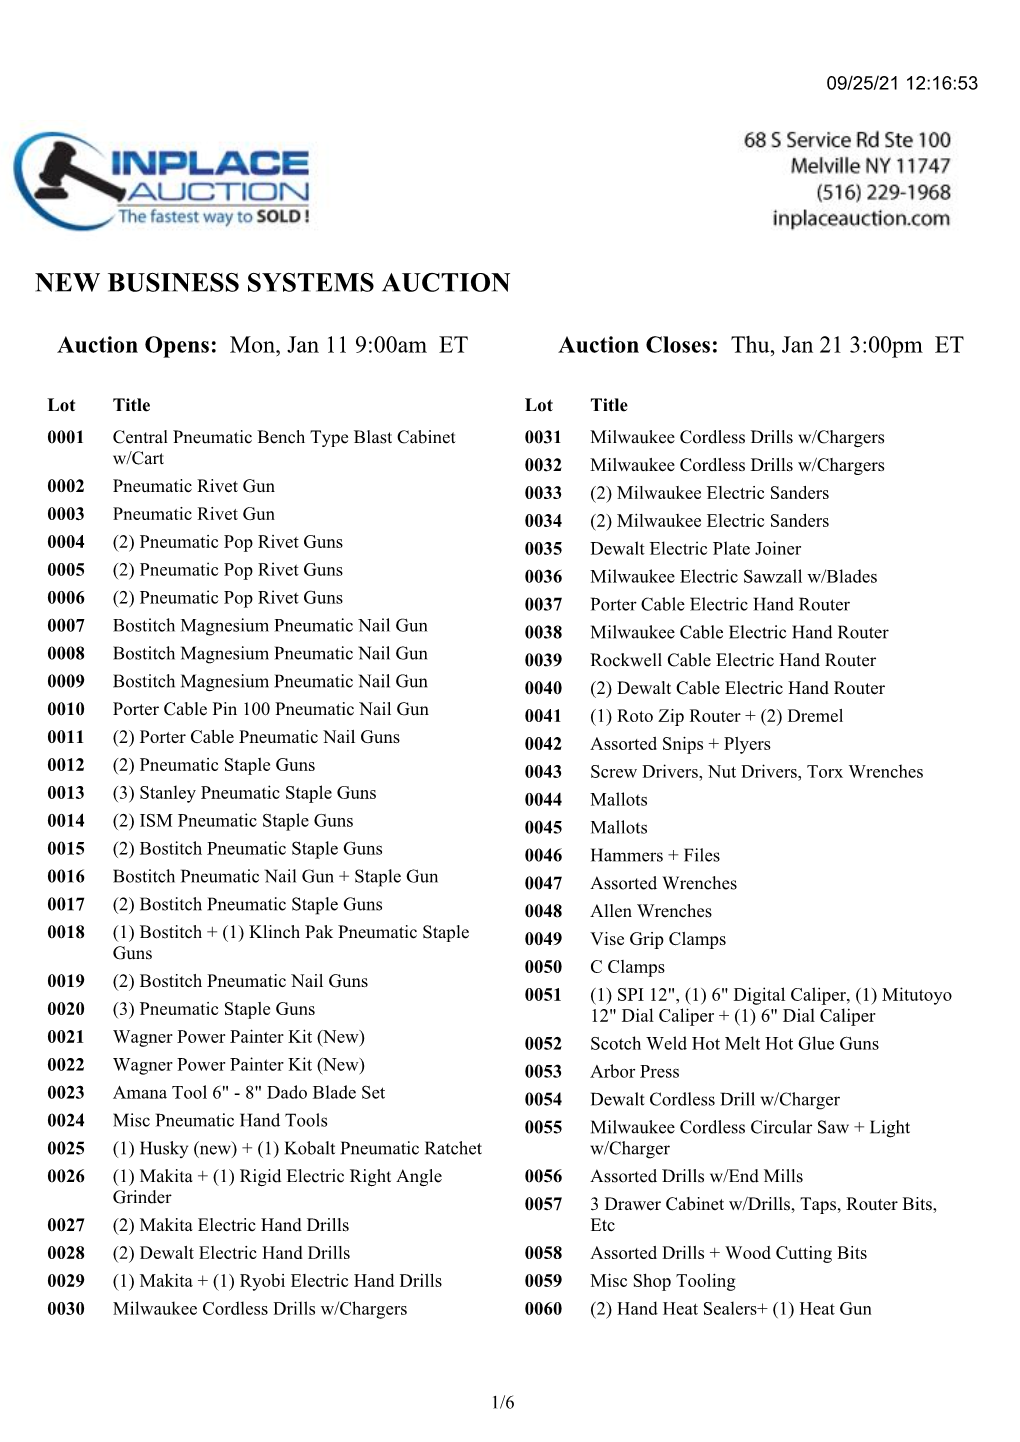 New Business Systems Auction